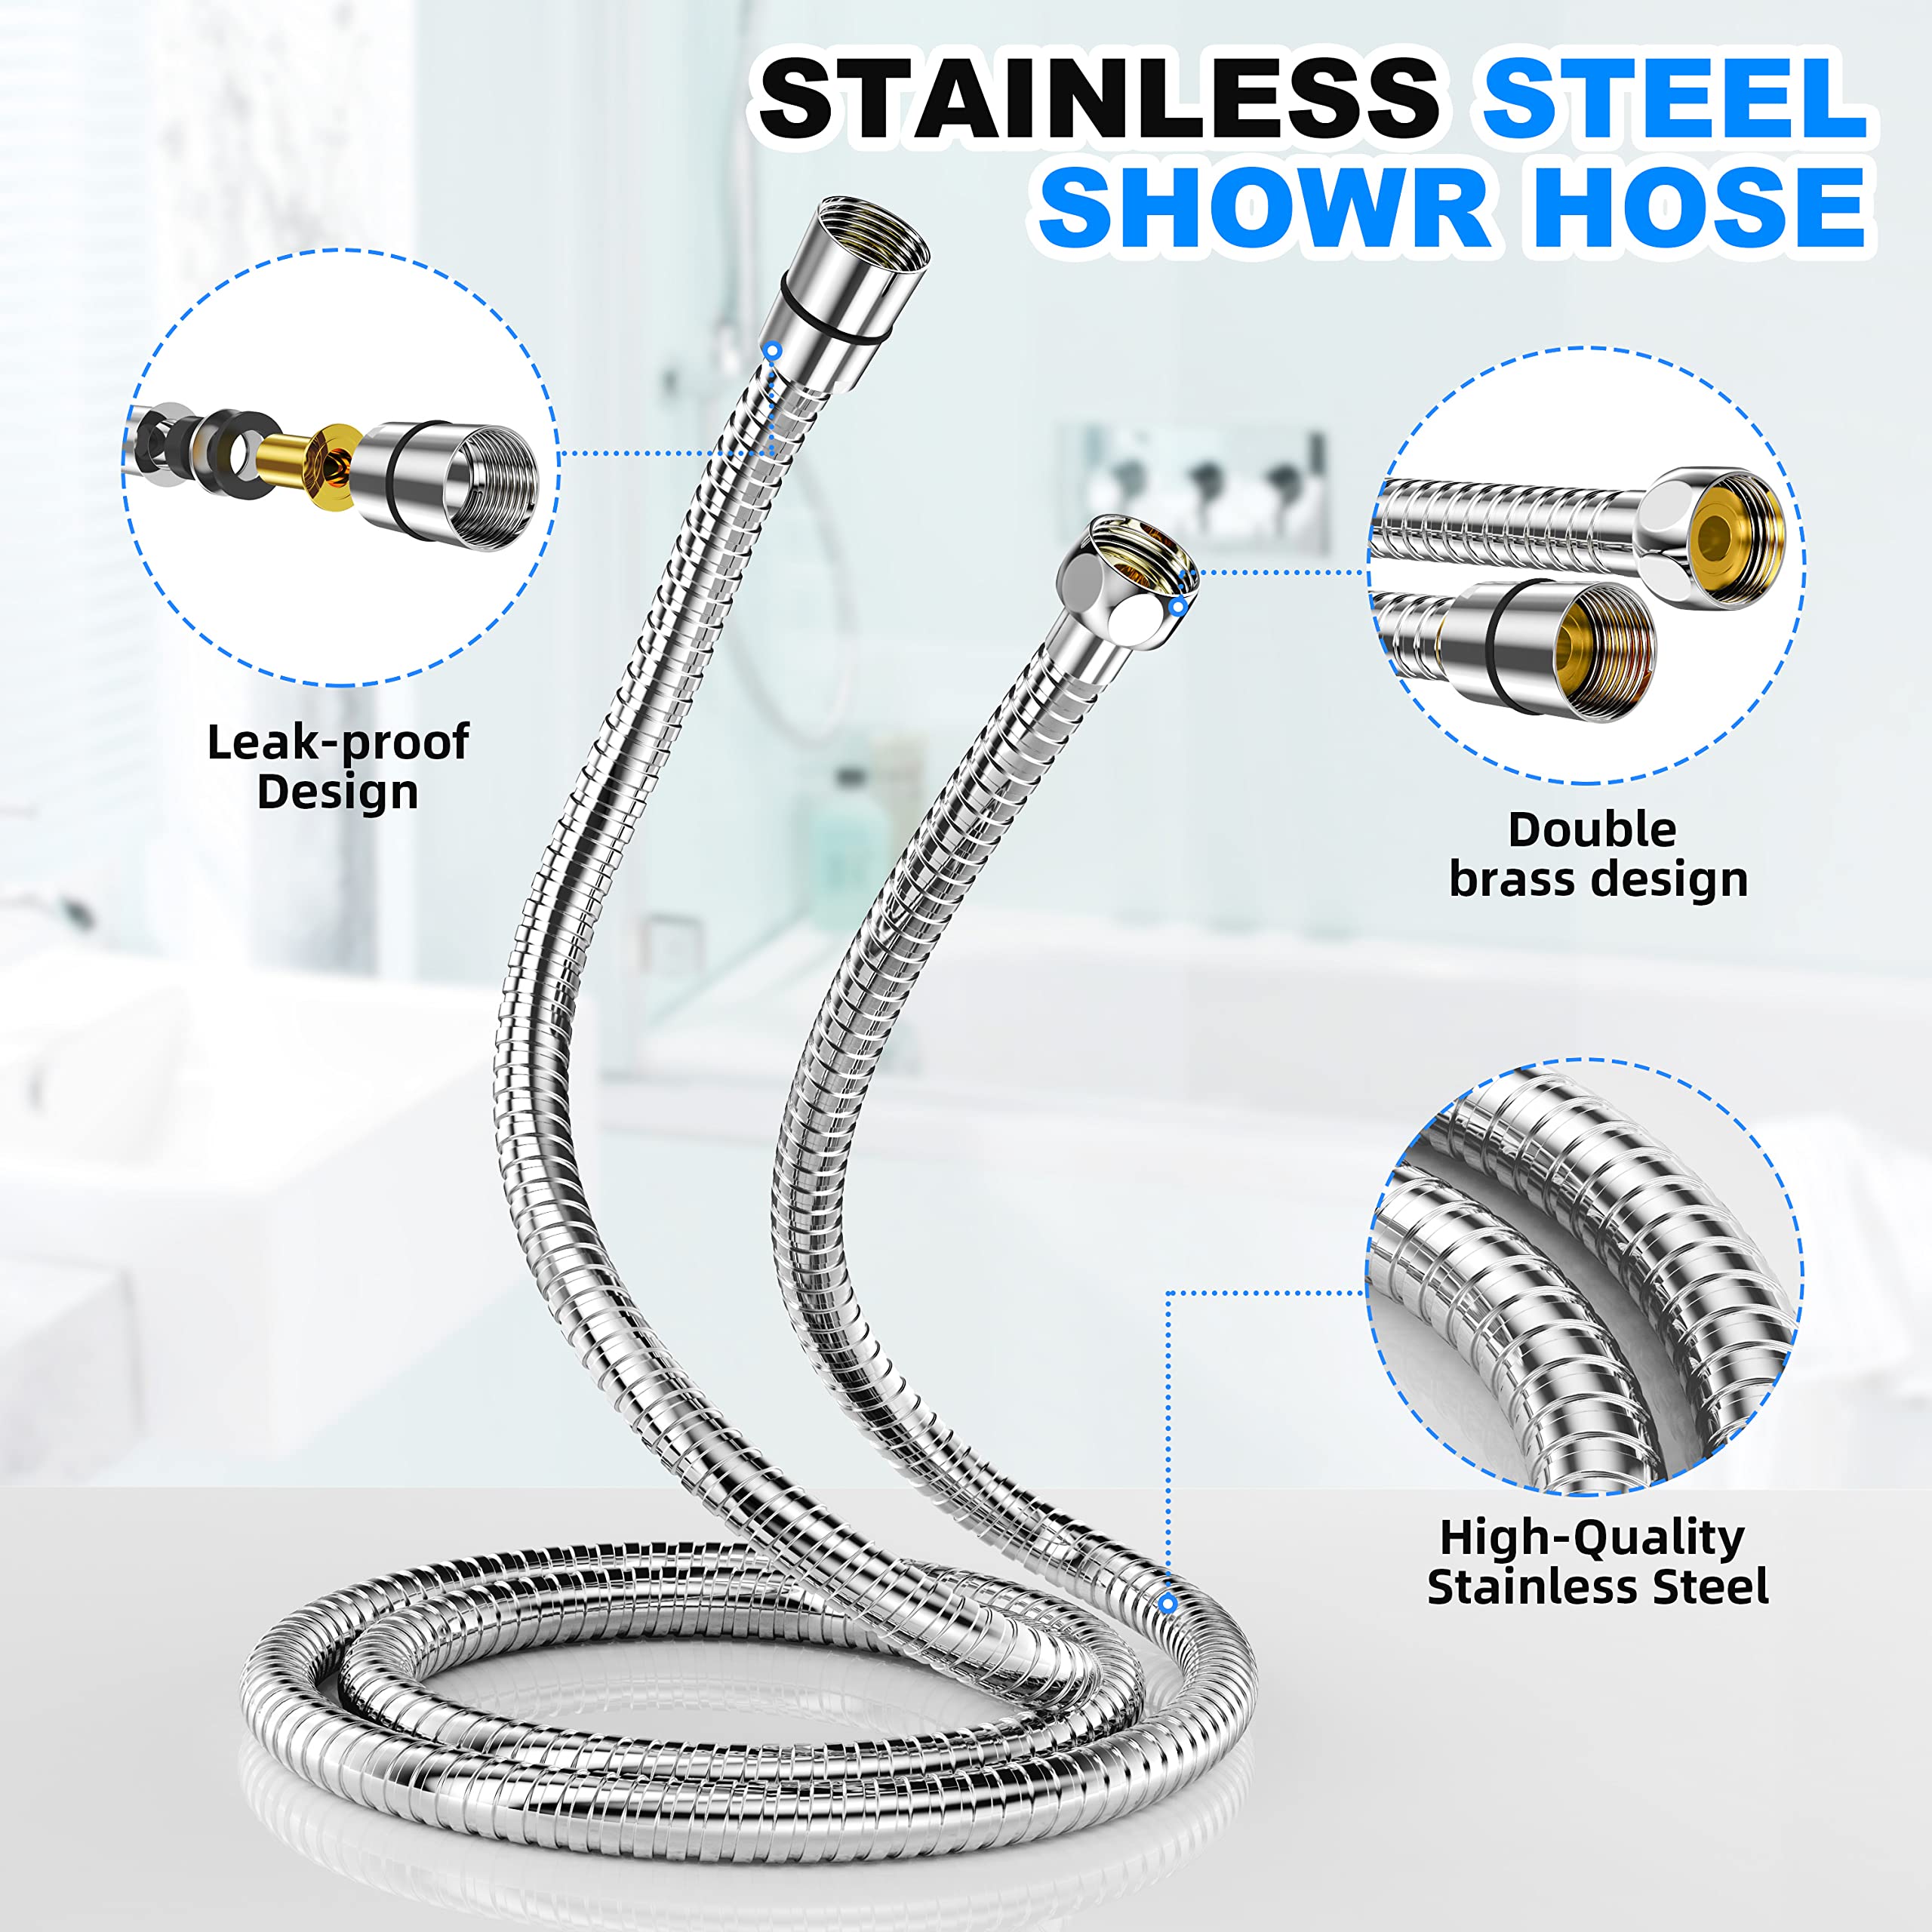 JiaSifu 10-Mode Handheld Shower Head Set, High Pressure Shower Head with 59” Stainless Steel Hose and Adjustable Brass Bracket, All Chrome Finish（Model: US-14591-X3）